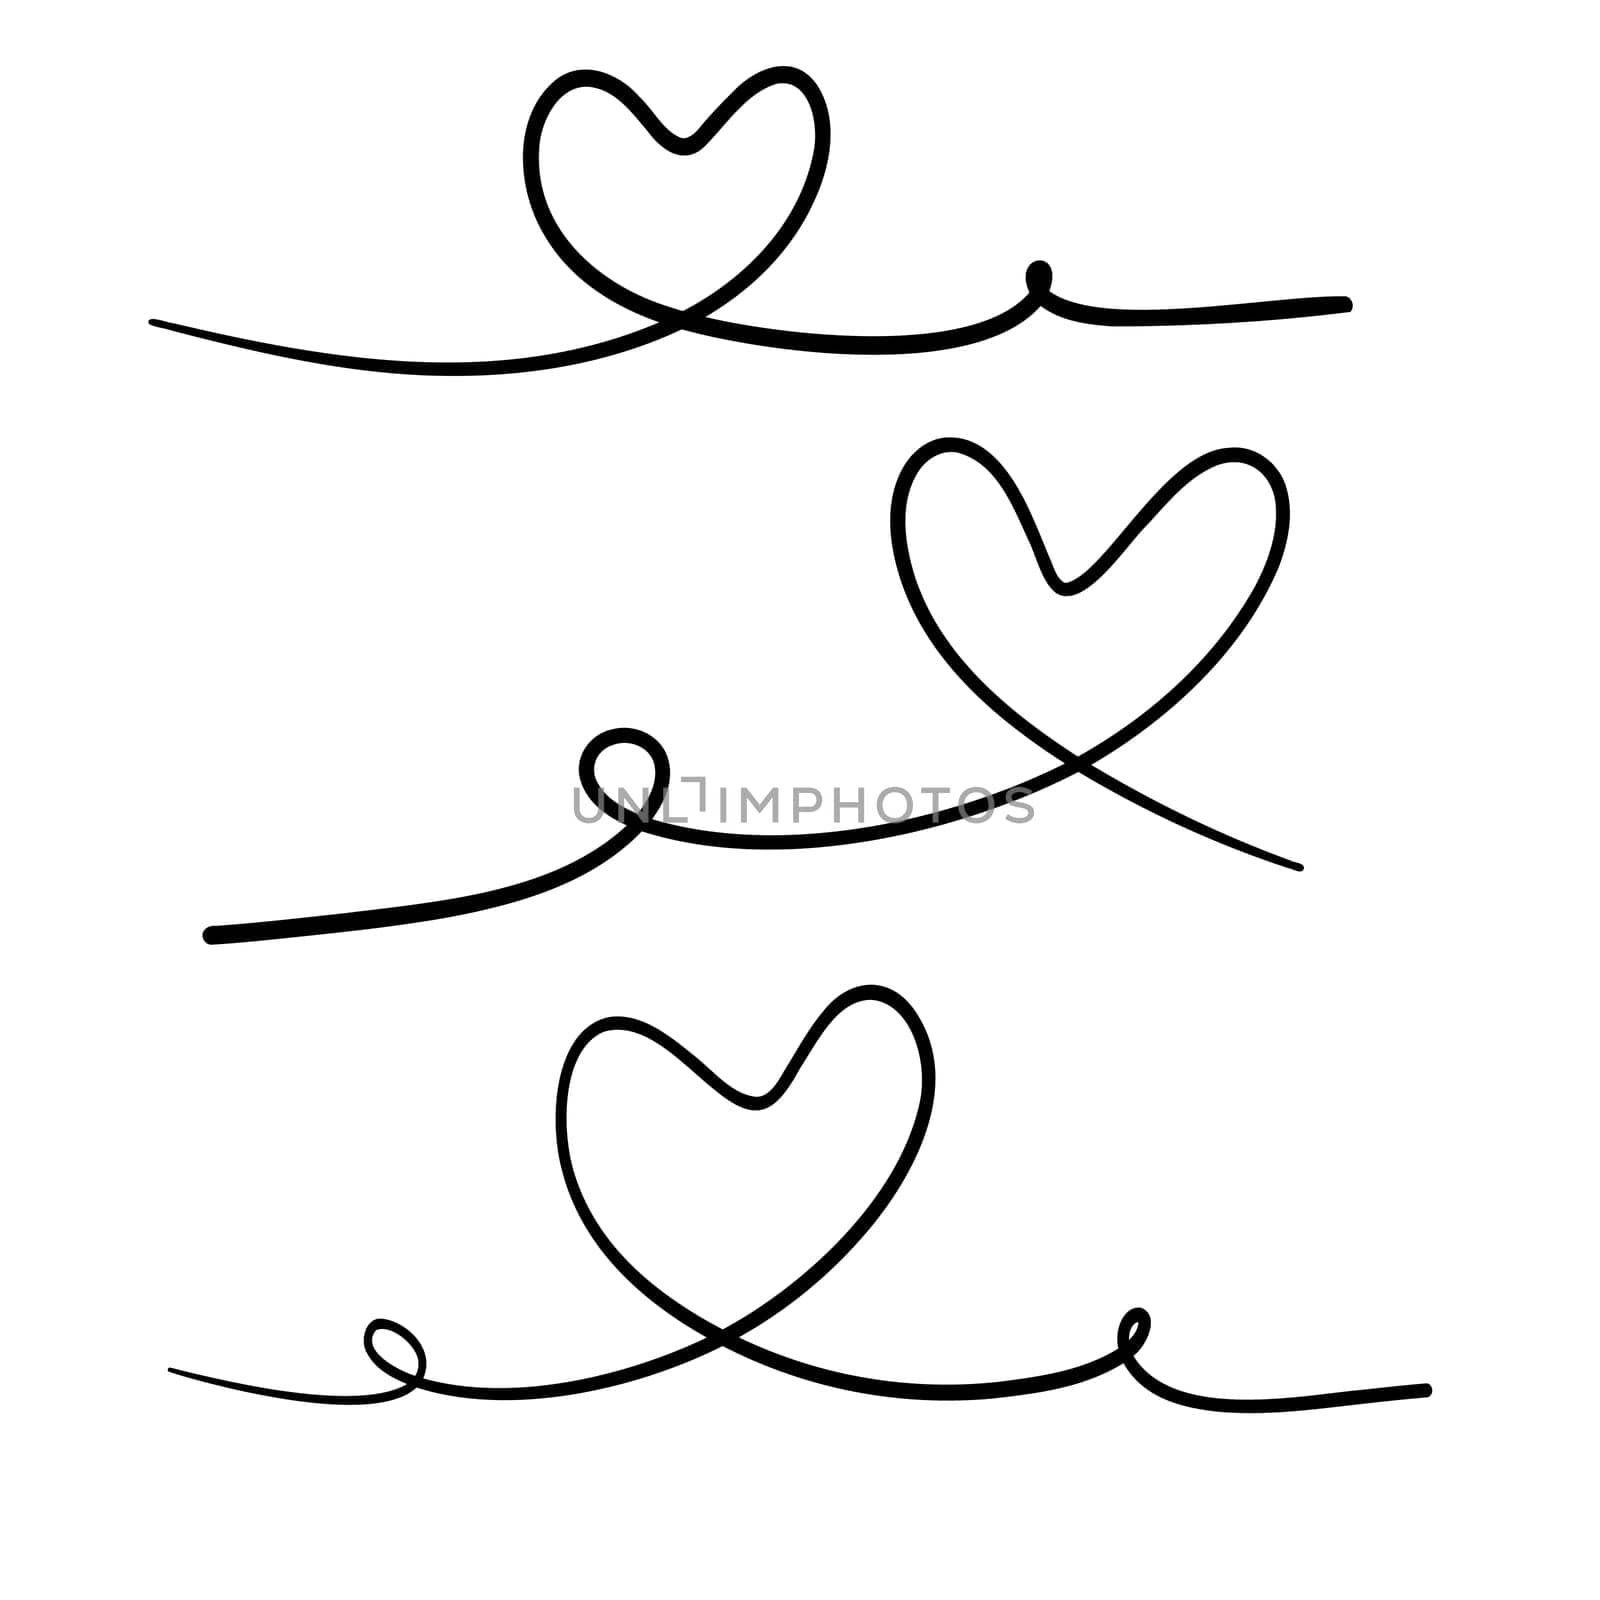 Hand drawn line heart on white background. Isolated